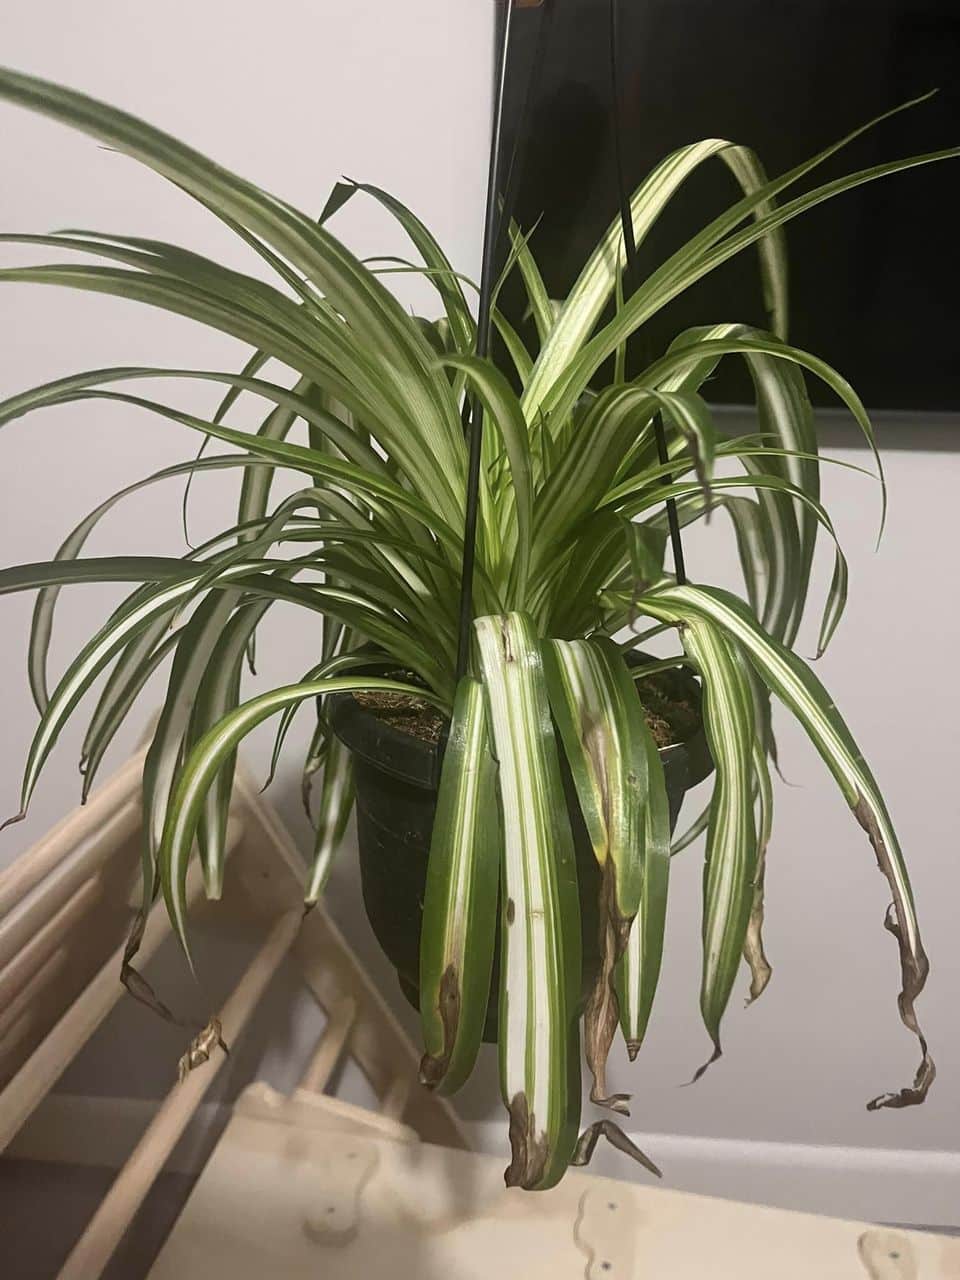 Why Does My Spider Plant Have Brown Tips